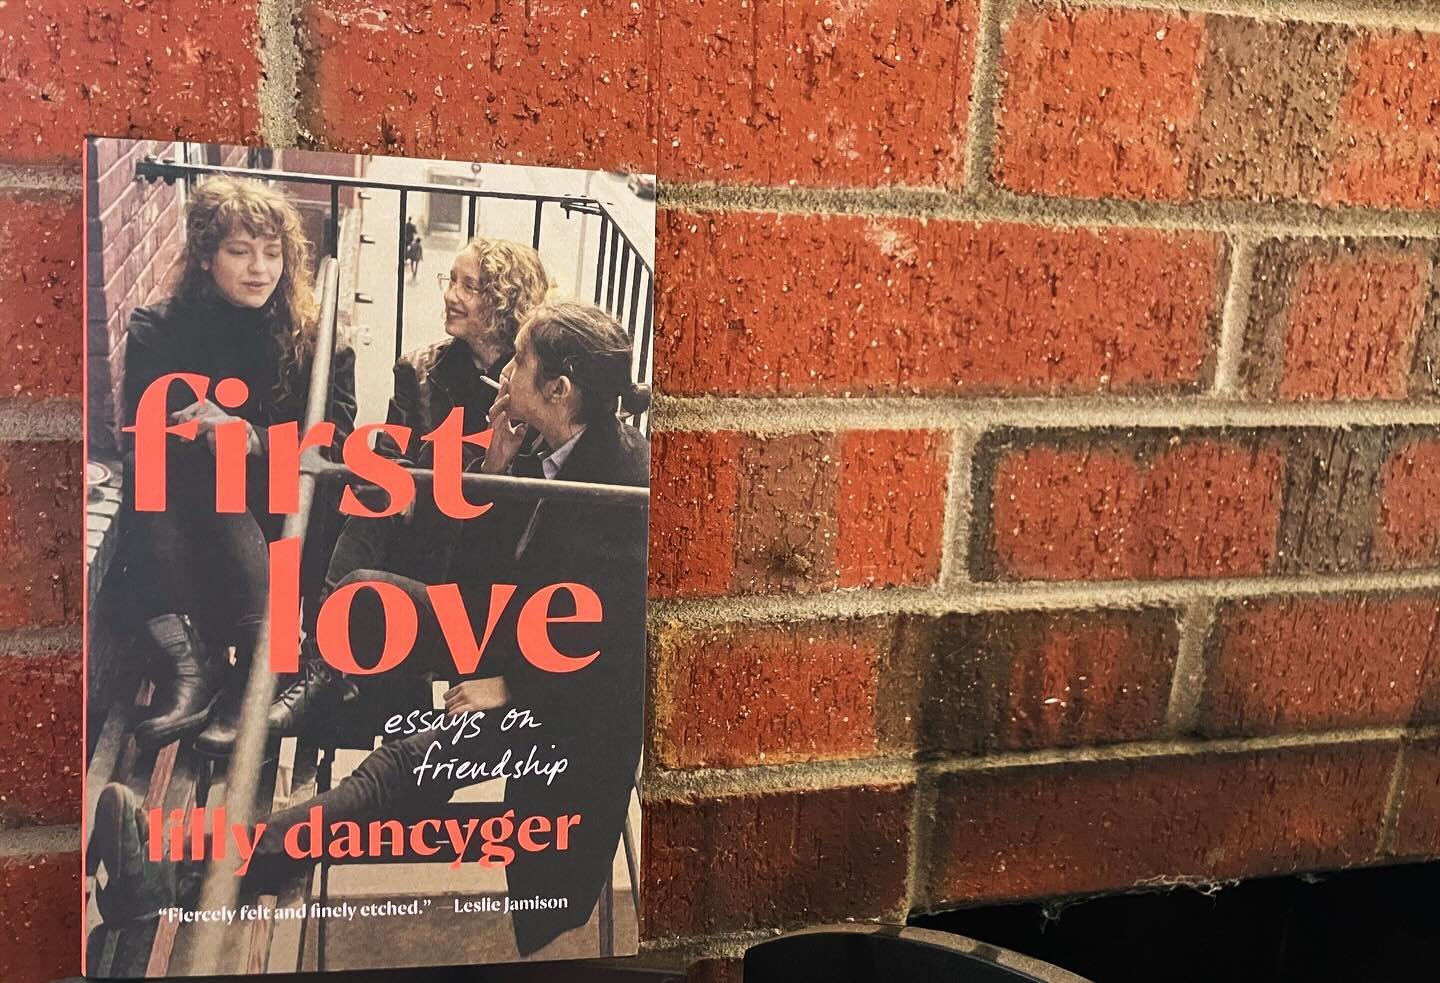 So excited for this book mail! @lillydancyger &lsquo;s First Love is a Moonlighting by @thelitpub must read!
🌙 &ldquo;Lilly Dancyger is an author who devotes more time to her students&rsquo; and editorial clients&rsquo; writing than her own.&rdquo;?